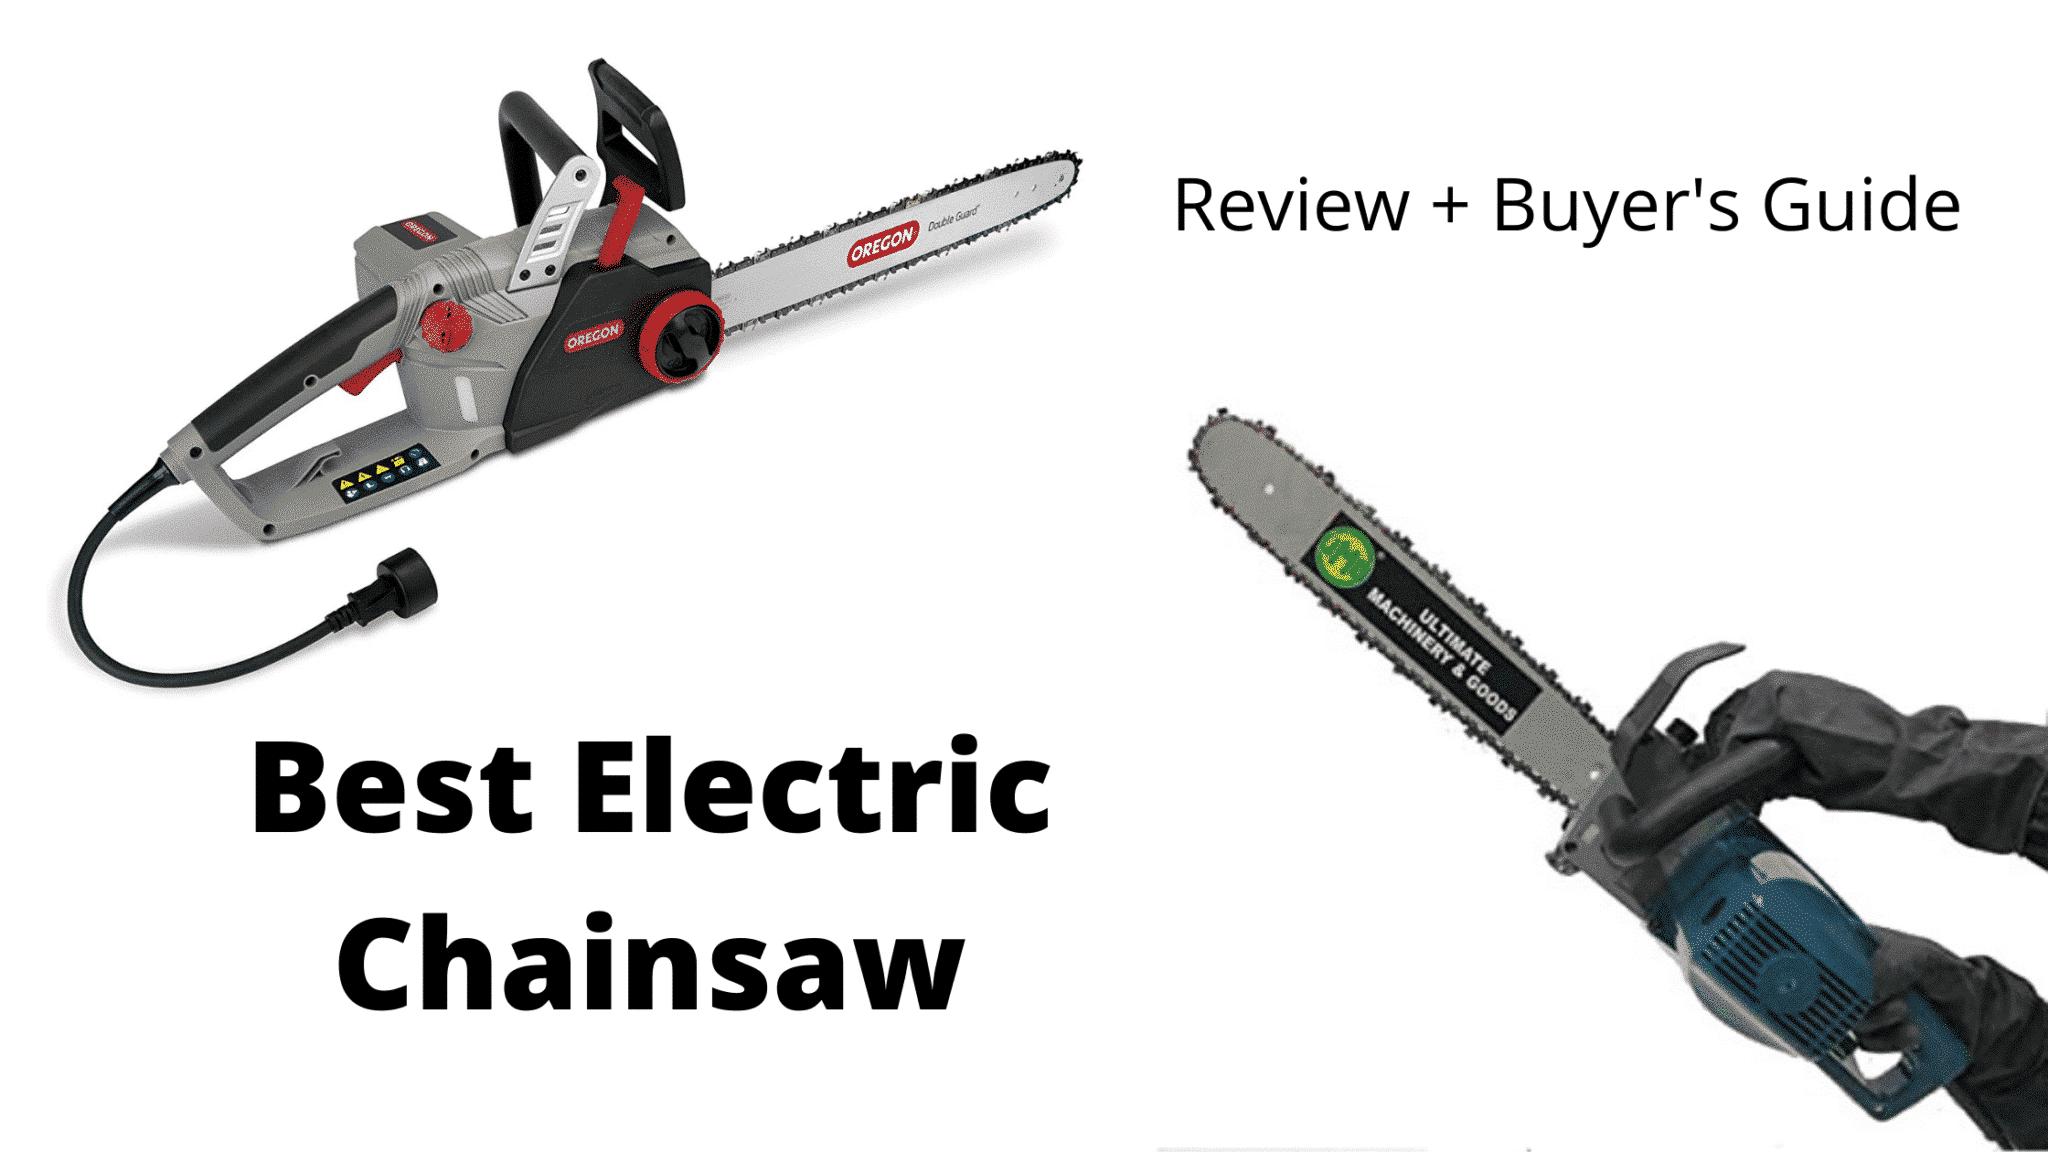 6 Best Electric Chainsaw on Amazon | Buyer’s Guide & Review